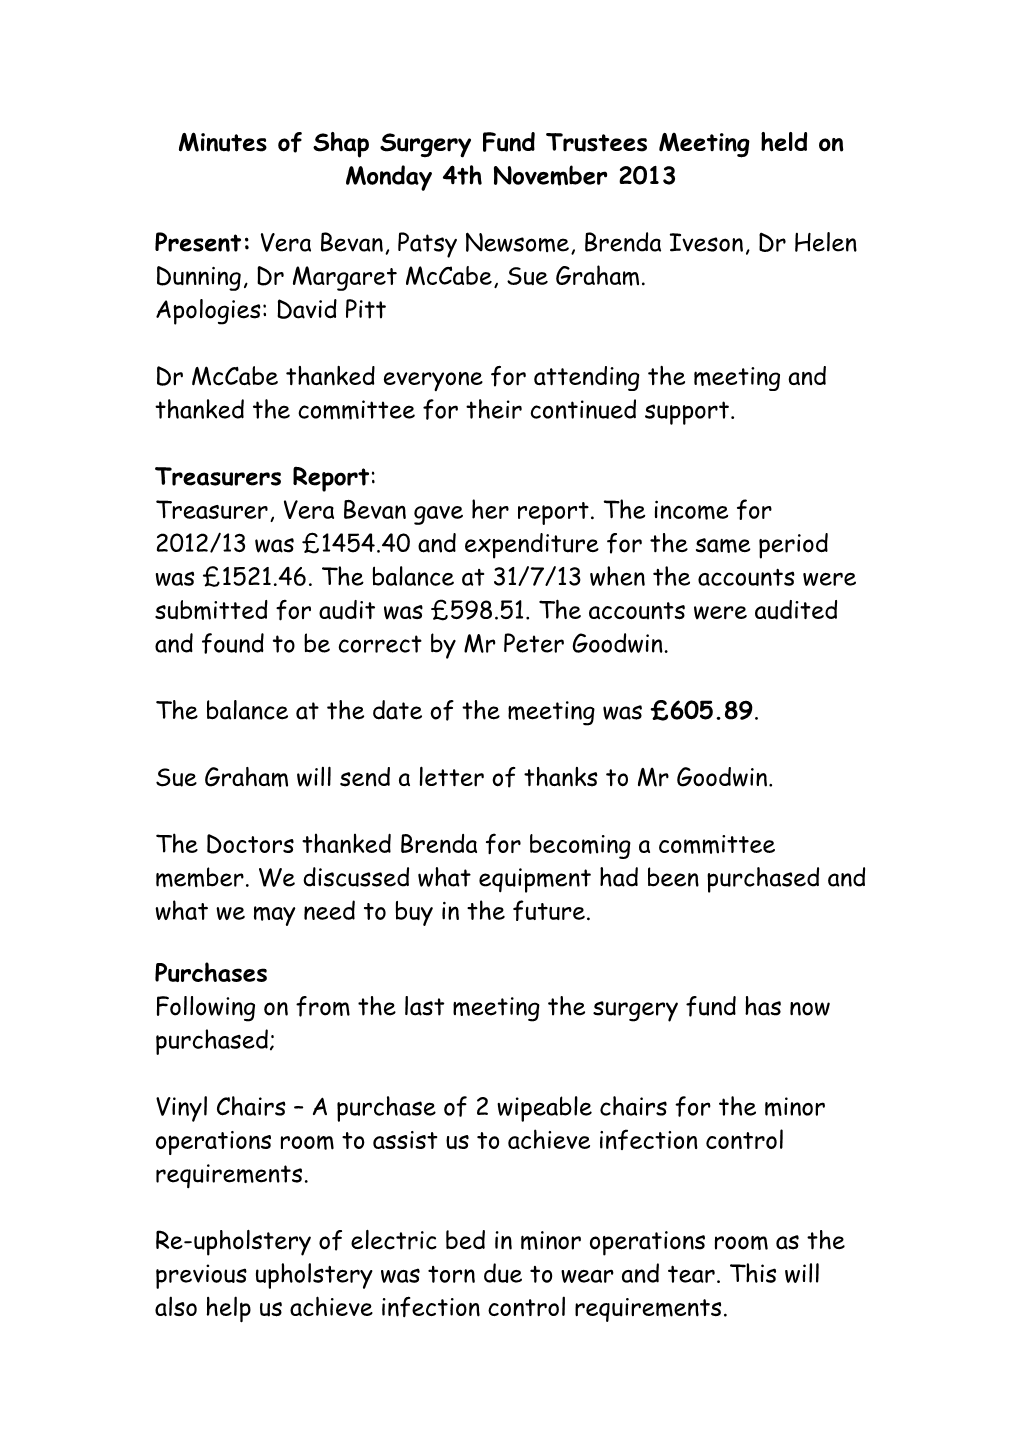 Minutes of Shap Surgery Fund Trustees Meeting Held on Monday 23Rd November 2009